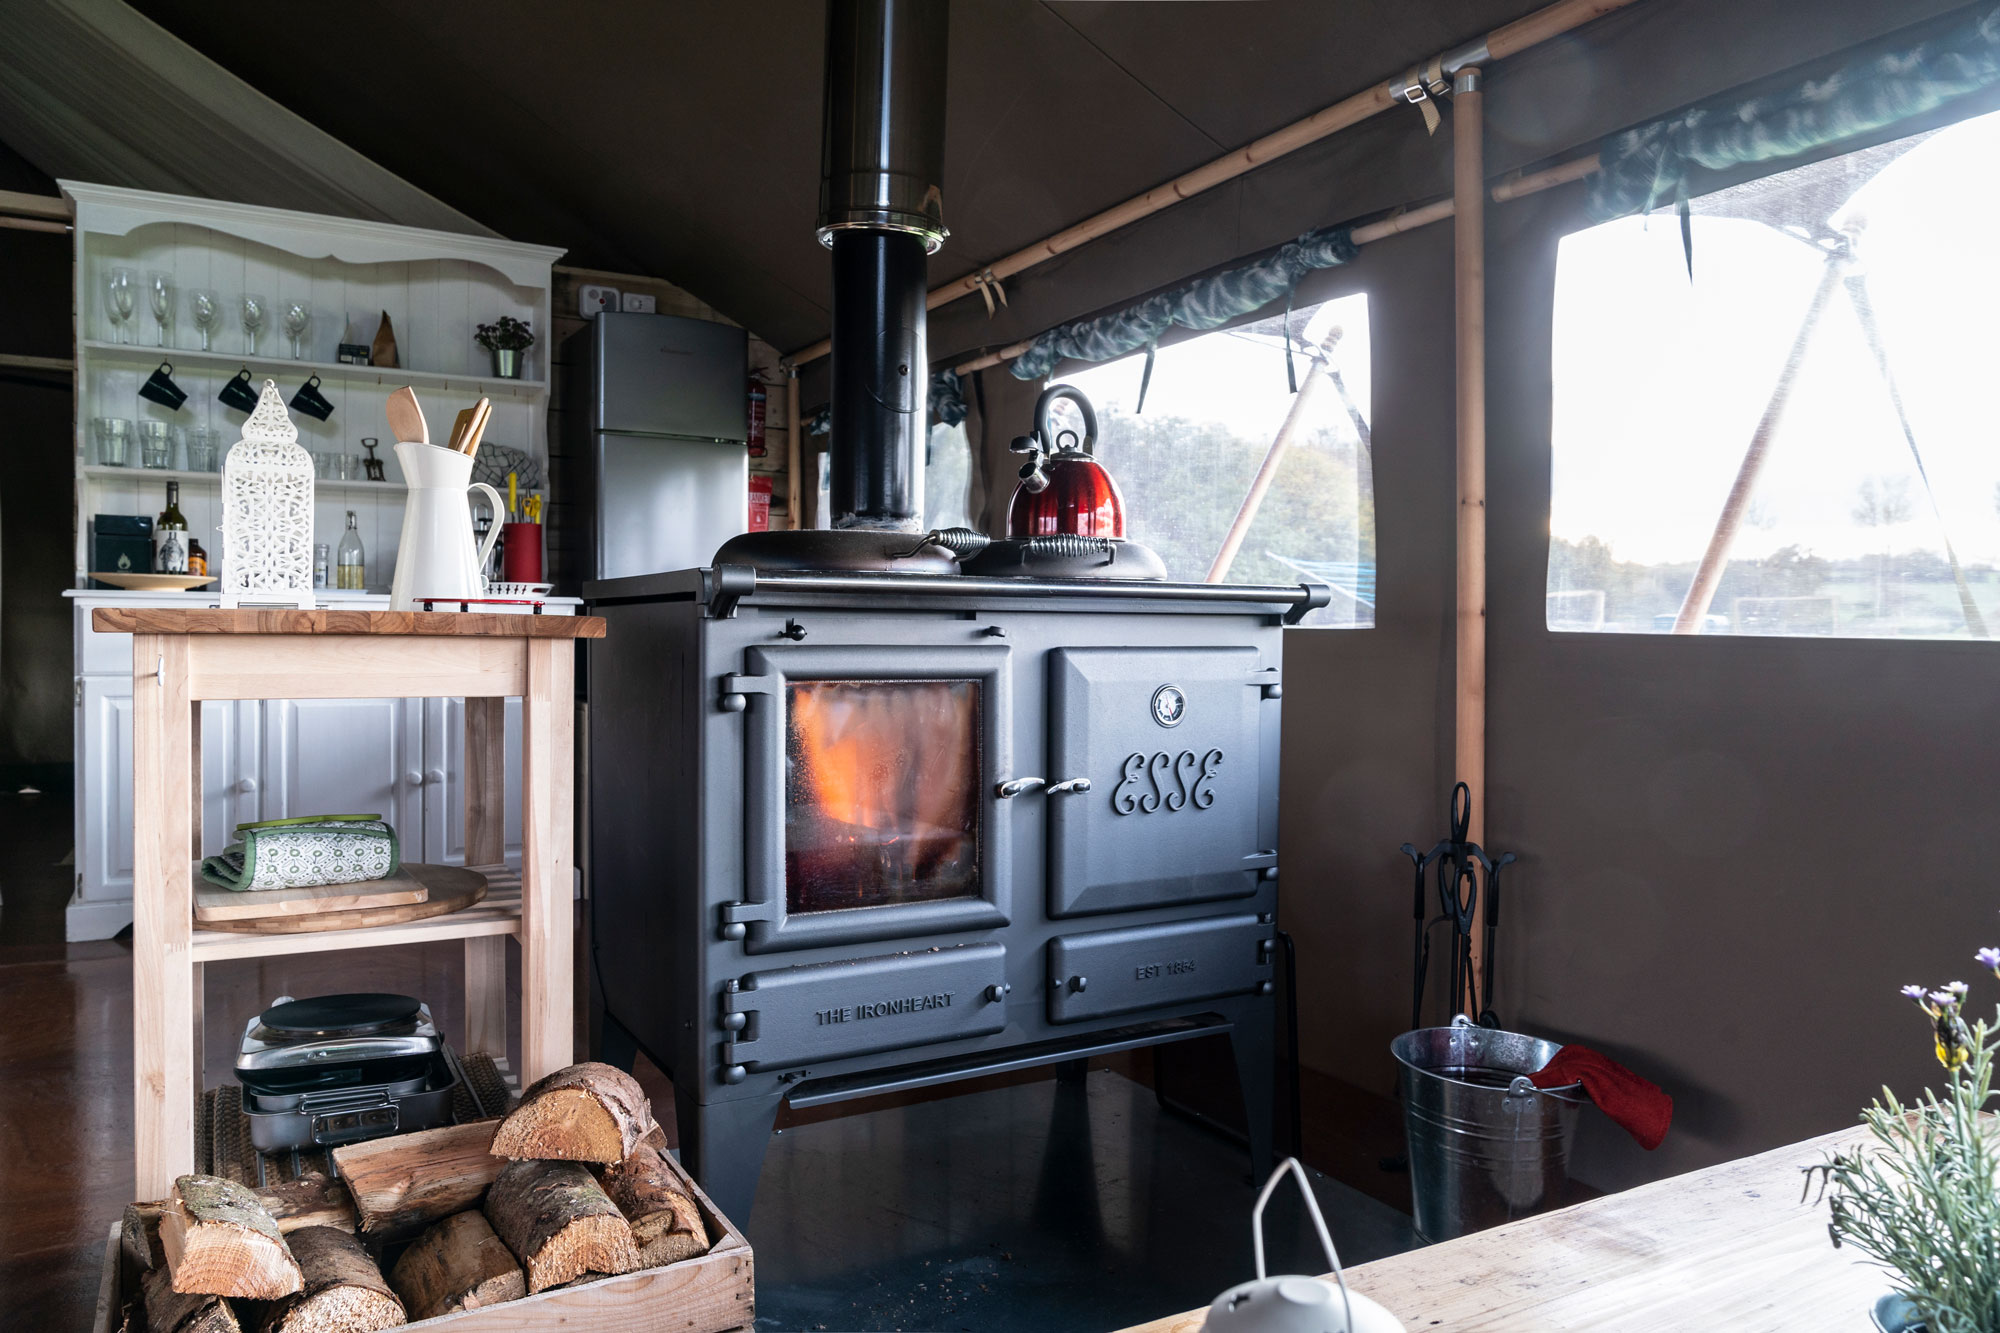 Middlestone Farm – Glamping in the English countryside by Soonafternoon